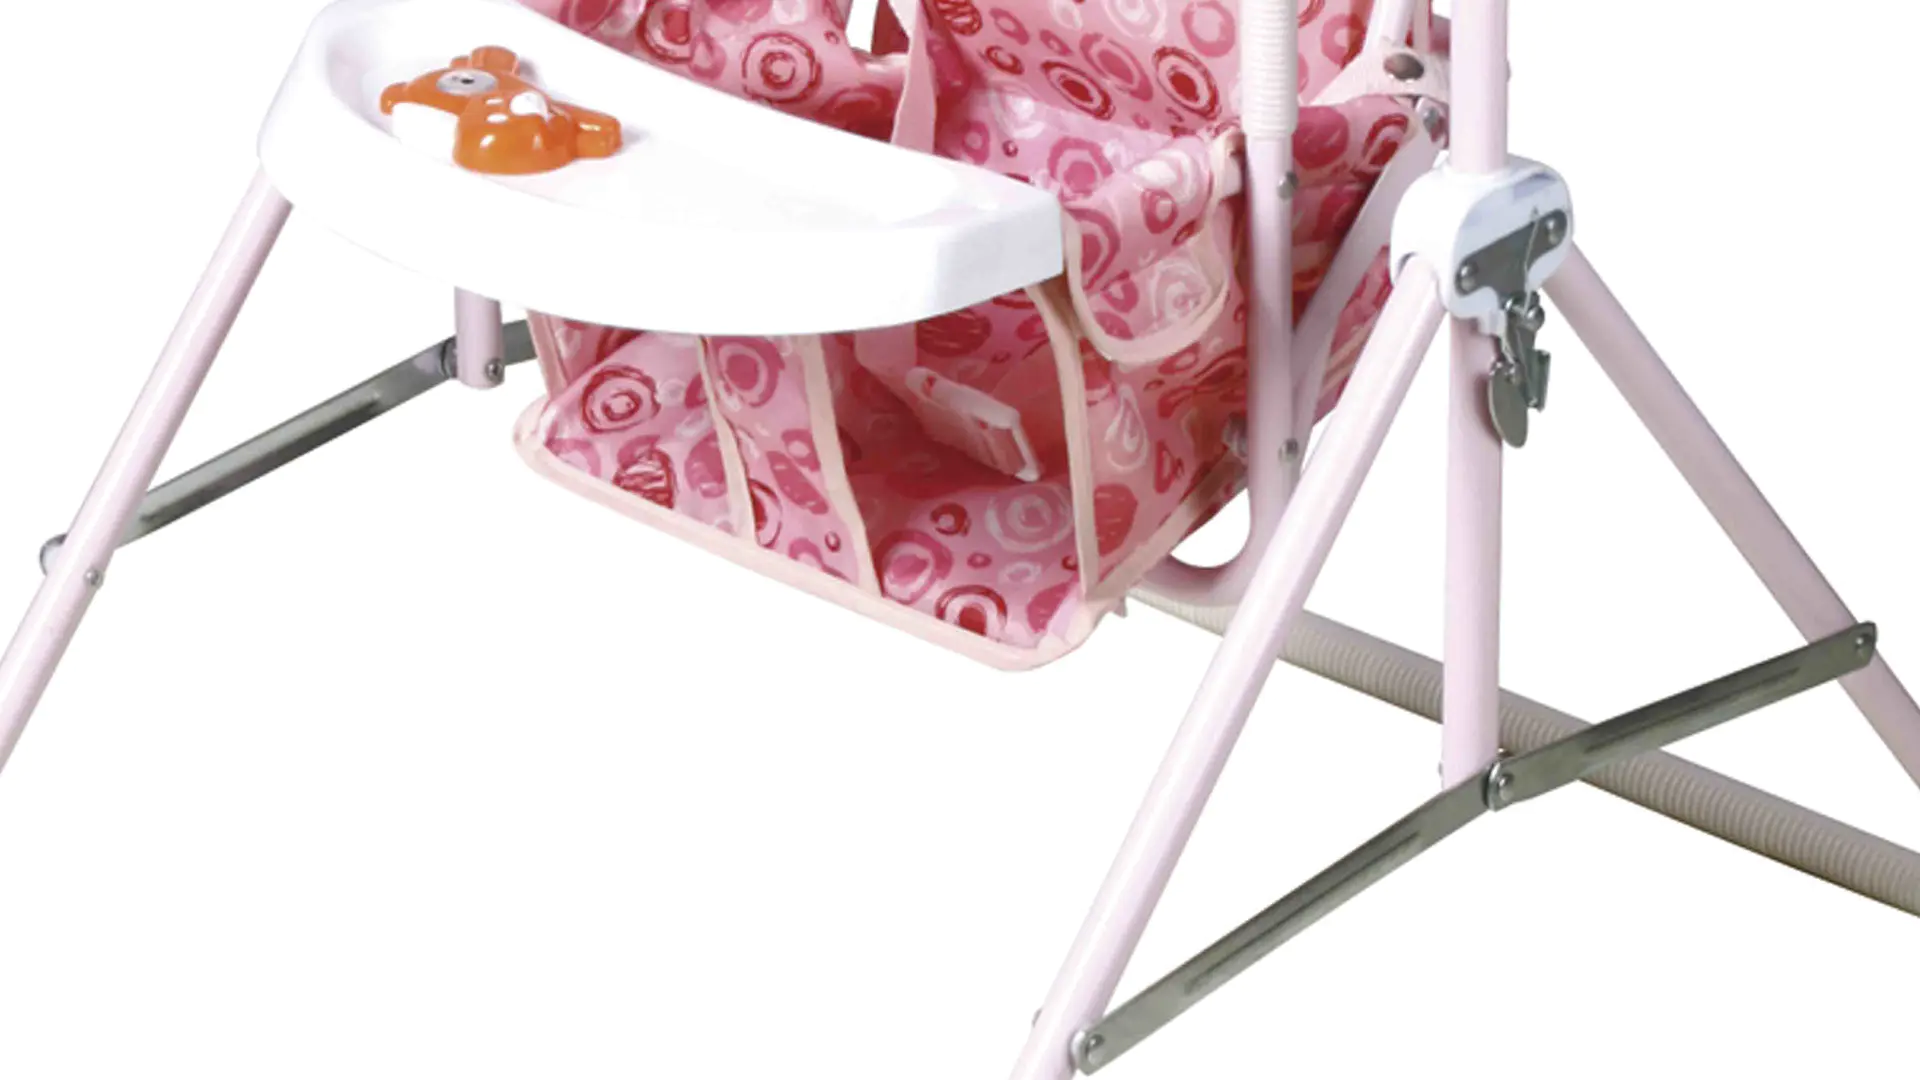 Aoqi multifunctional baby musical swing chair factory for kids